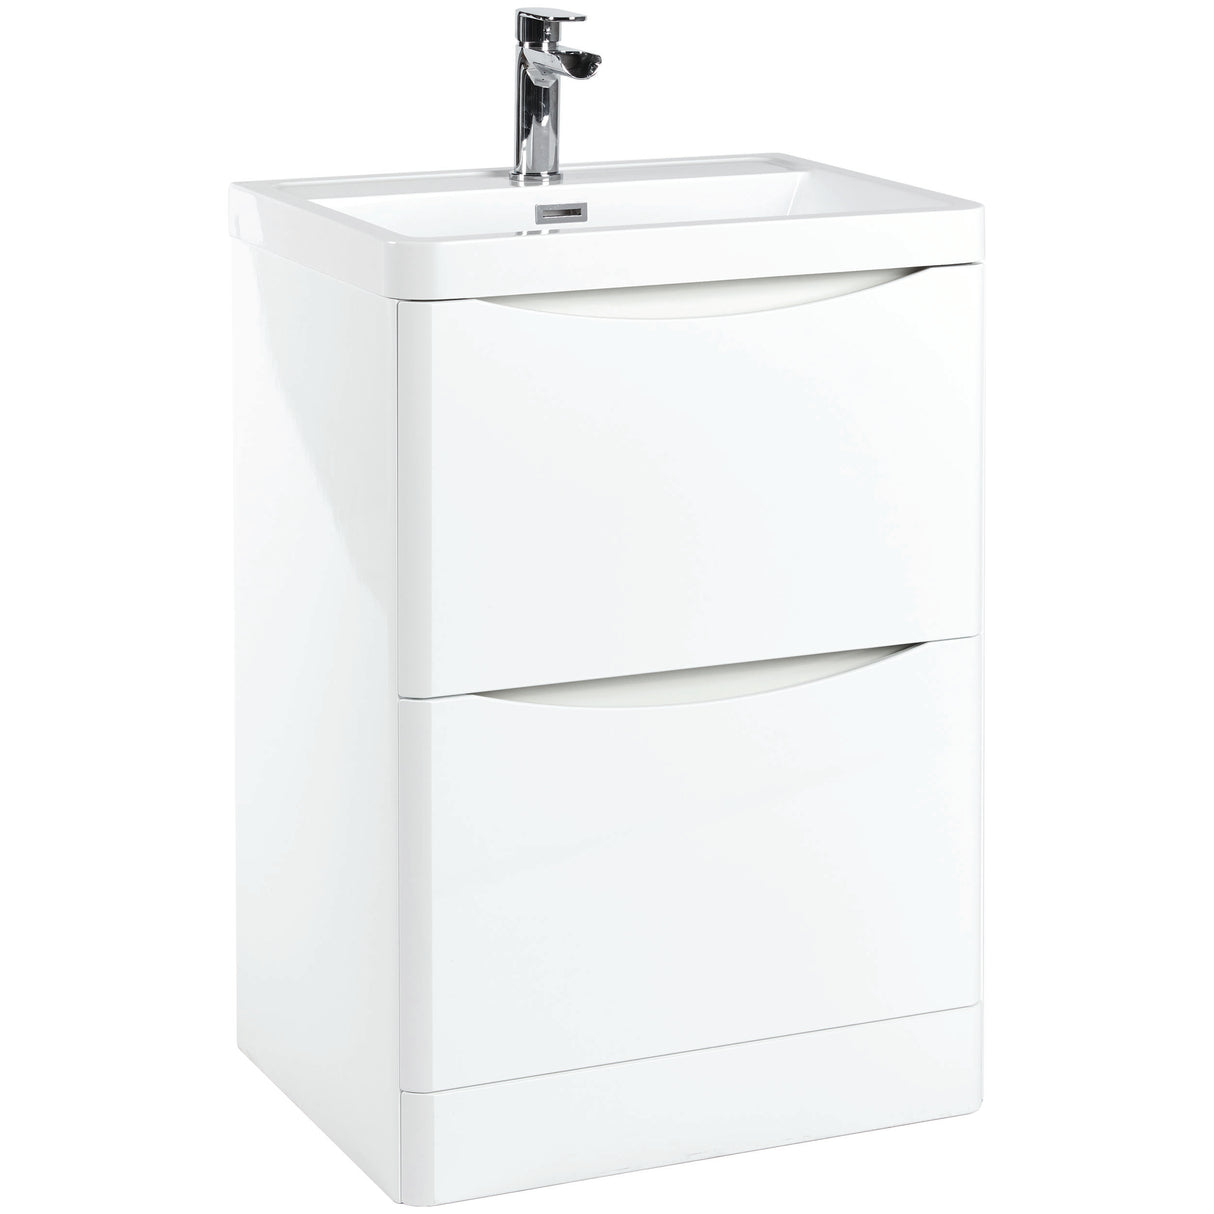 Floor Standing Vanity Unit 600mm With Basin Or Counter Top - 2 Colours !